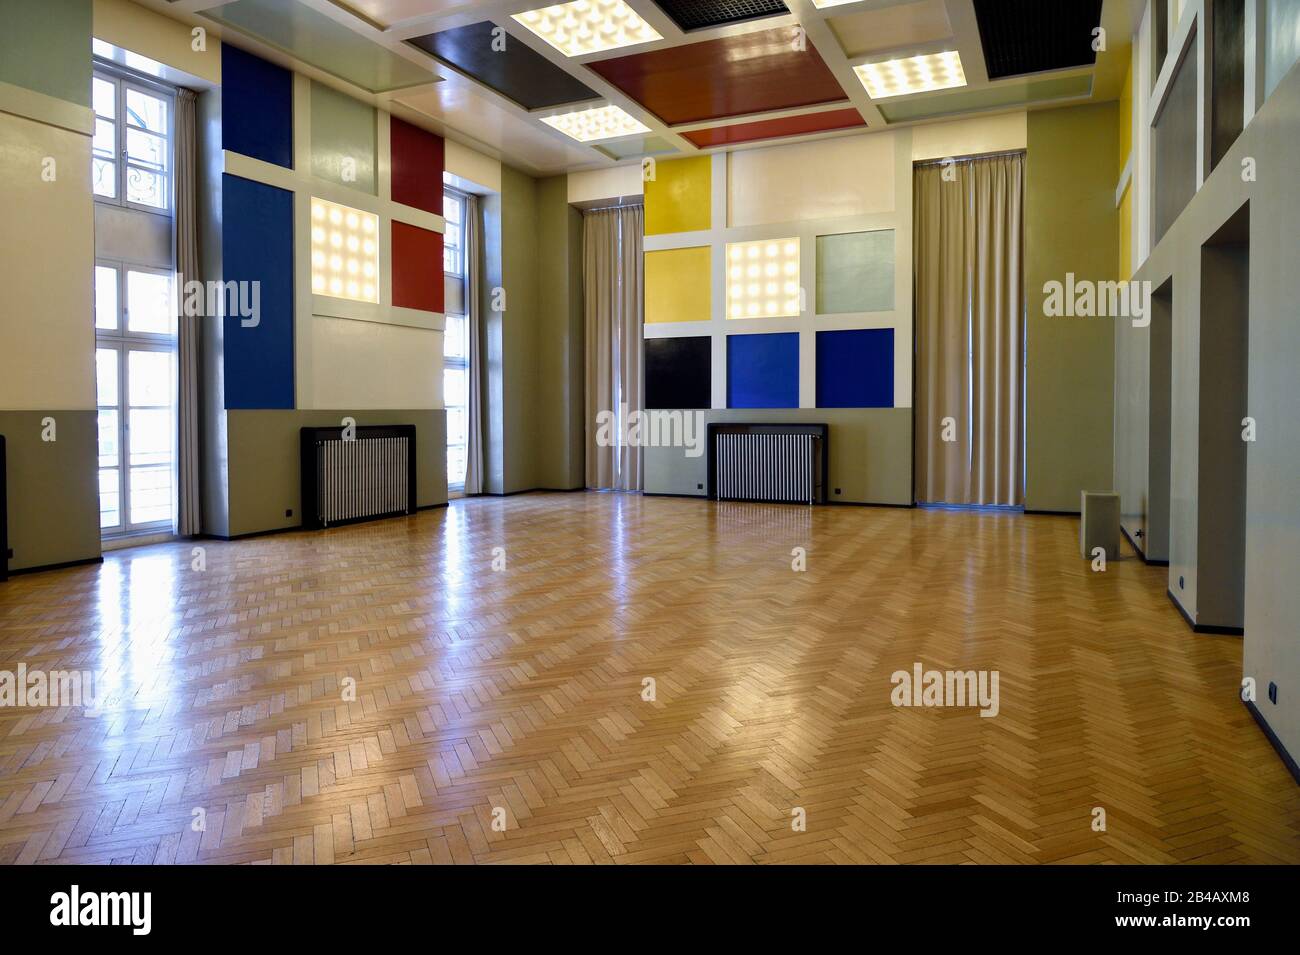 France, Bas Rhin, Strasbourg, old town listed as World Heritage by UNESCO, Place Kleber, art Deco salle de l'Aubette decorated by Jean Arp and Sophie Taeuber-Arp at the end of the 1920's, the party room Stock Photo